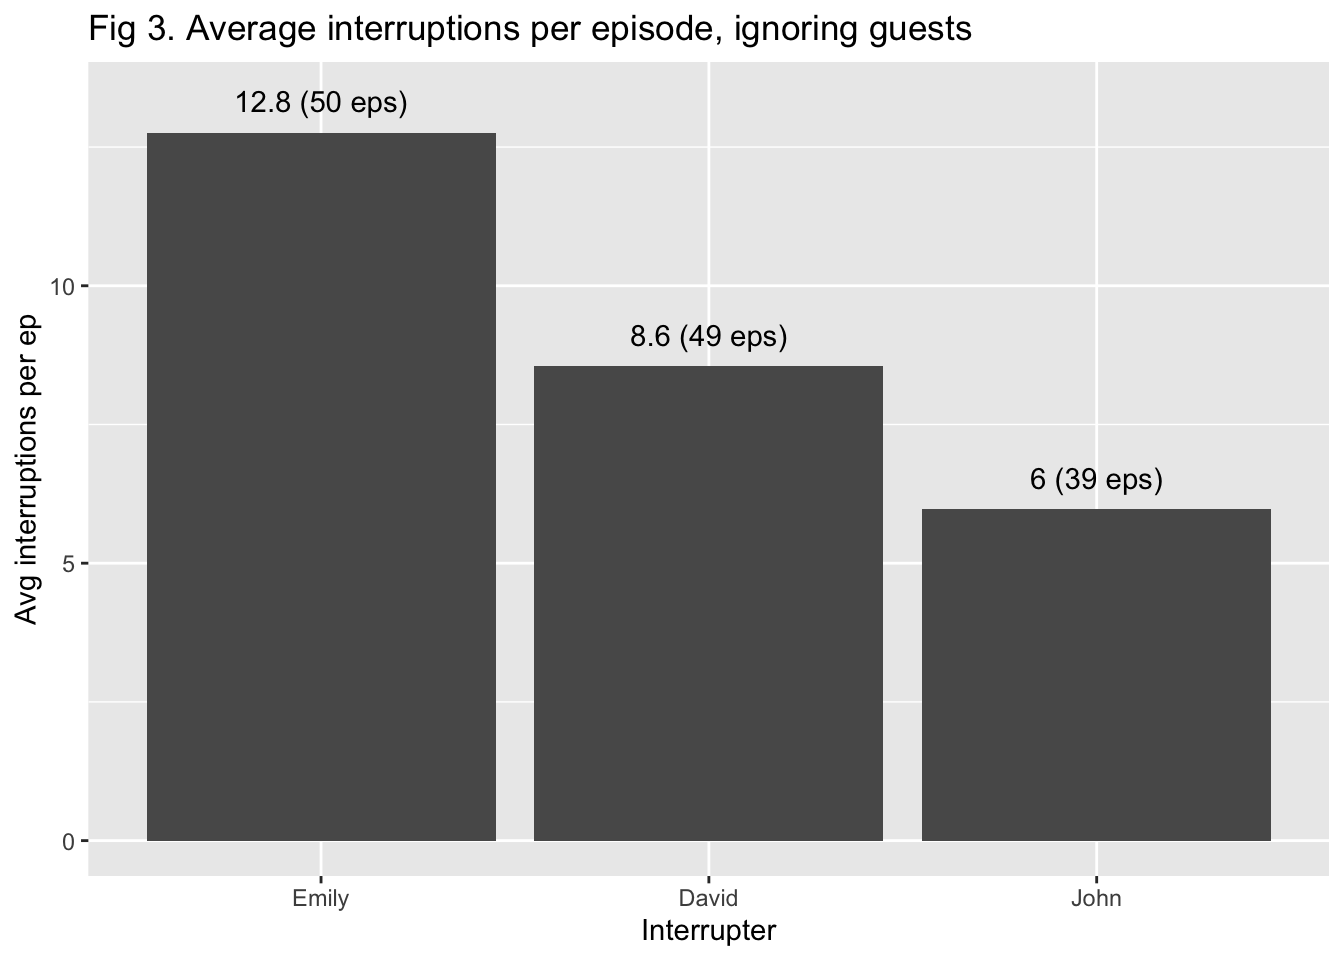 Figure 3 Average interruptions per episode, ignoring guests. Shows Emily has the highest average number of interruptions per episode, and John's rate is less than half of hers